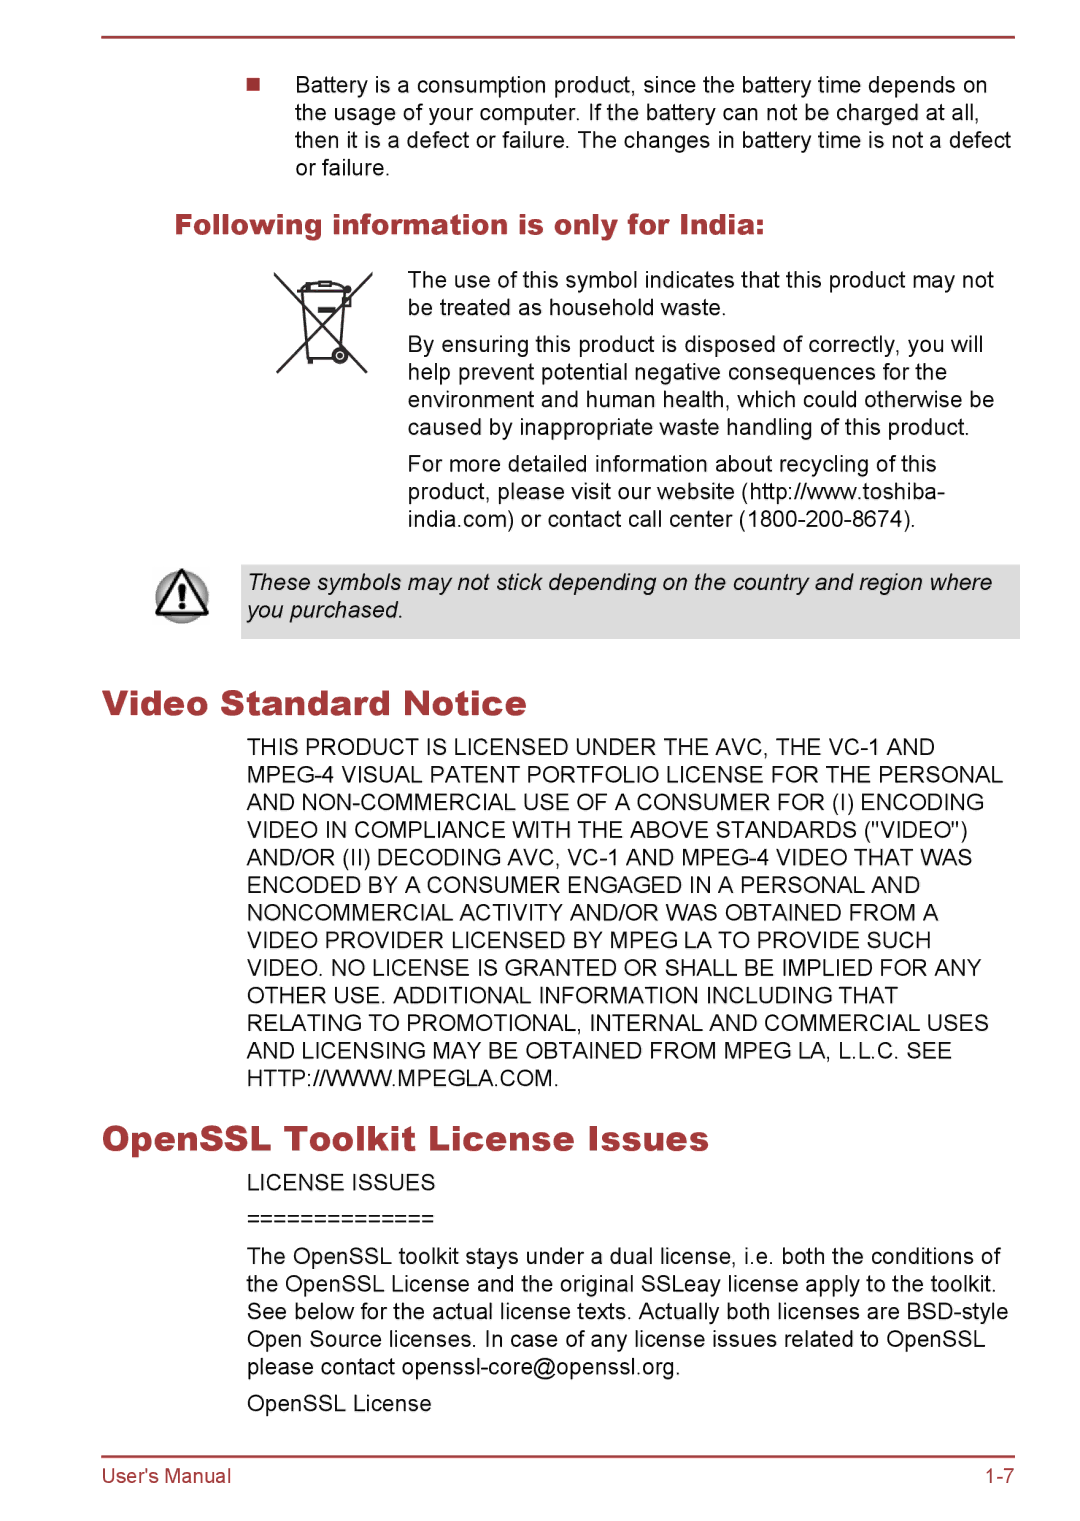 Toshiba WT8-A Series Video Standard Notice OpenSSL Toolkit License Issues, Following information is only for India 